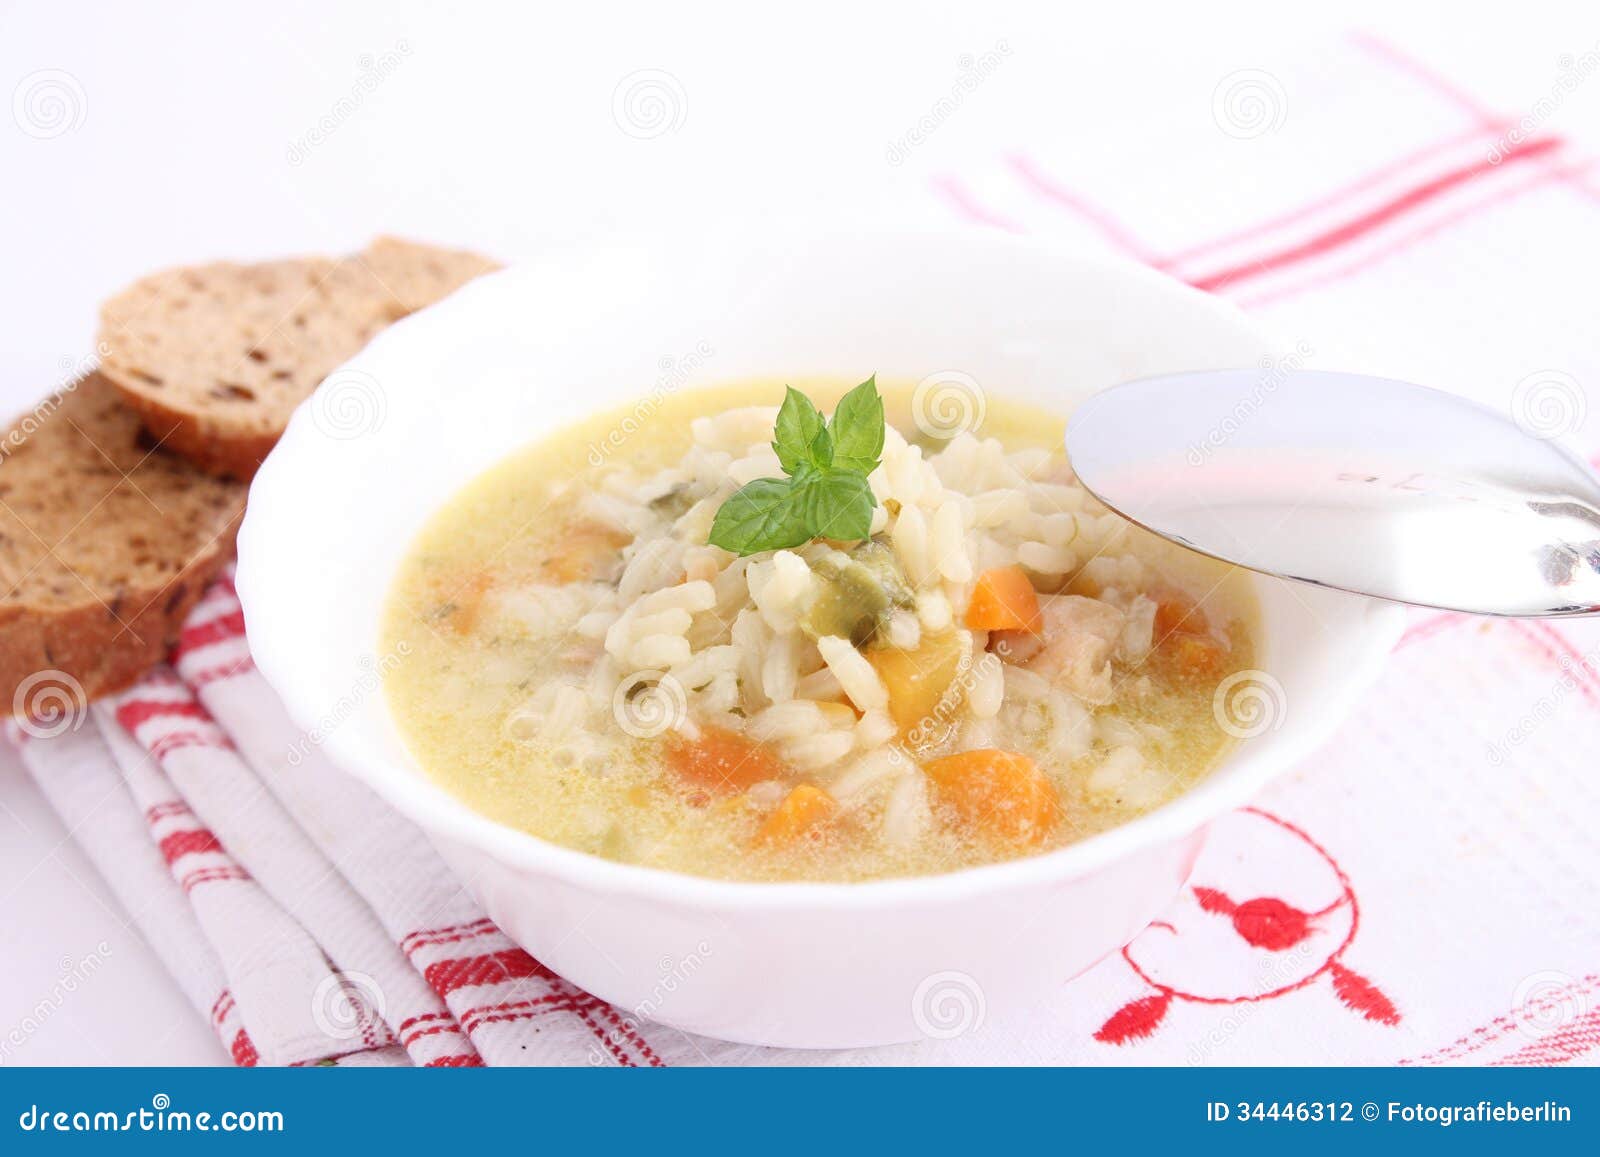 Stew of Rice and Vegetables Stock Photo - Image of food, heathy: 34446312